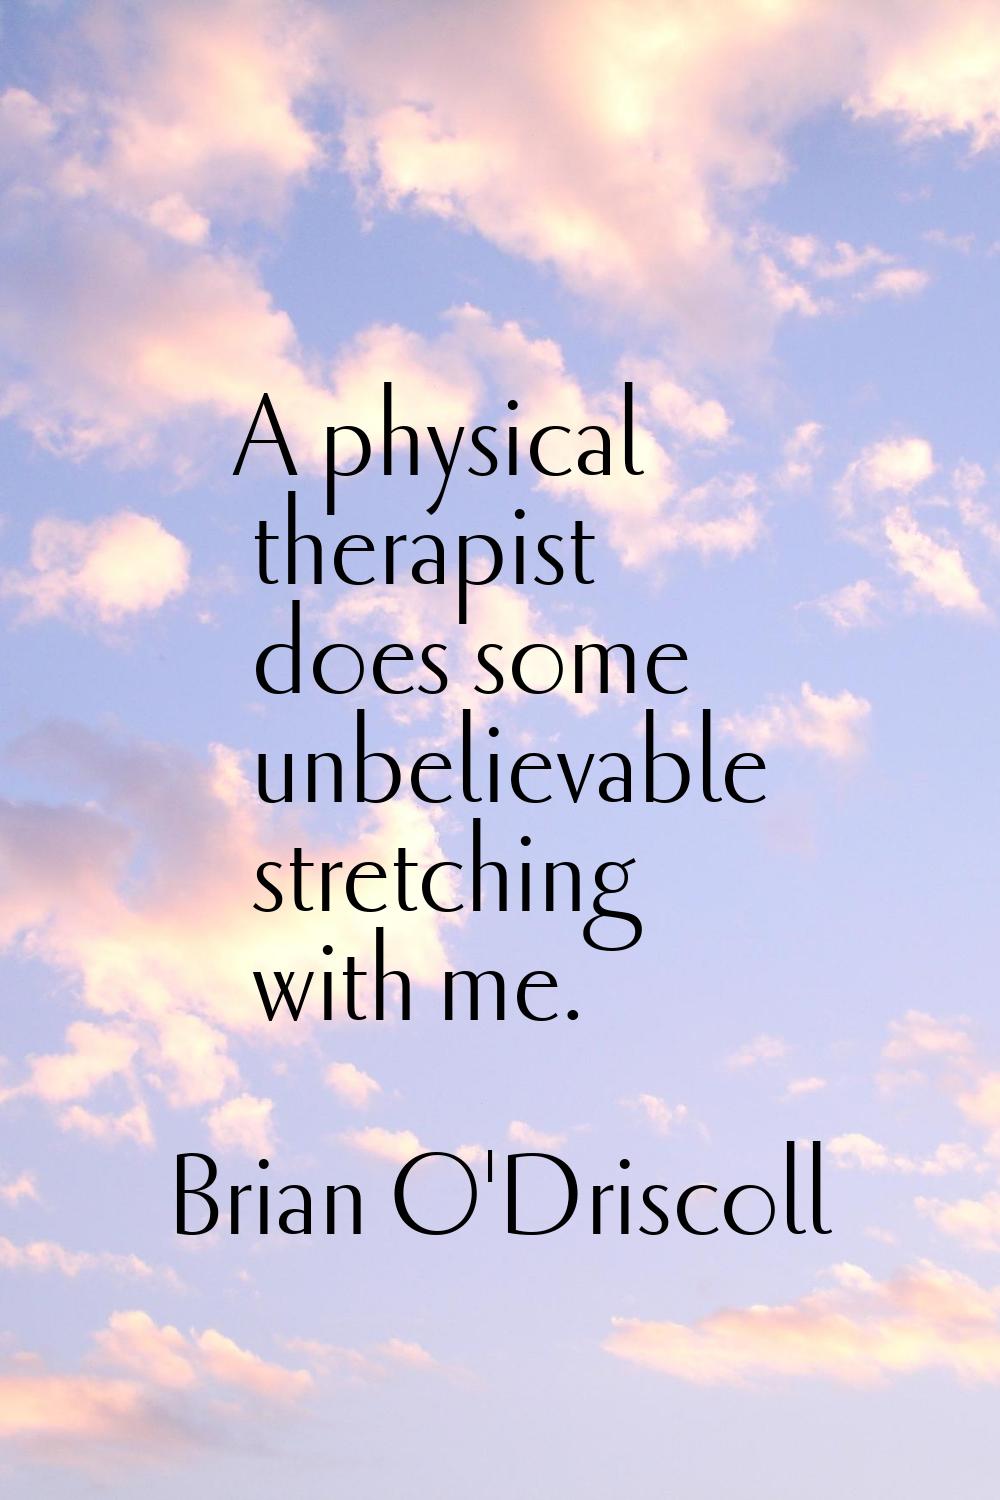 A physical therapist does some unbelievable stretching with me.